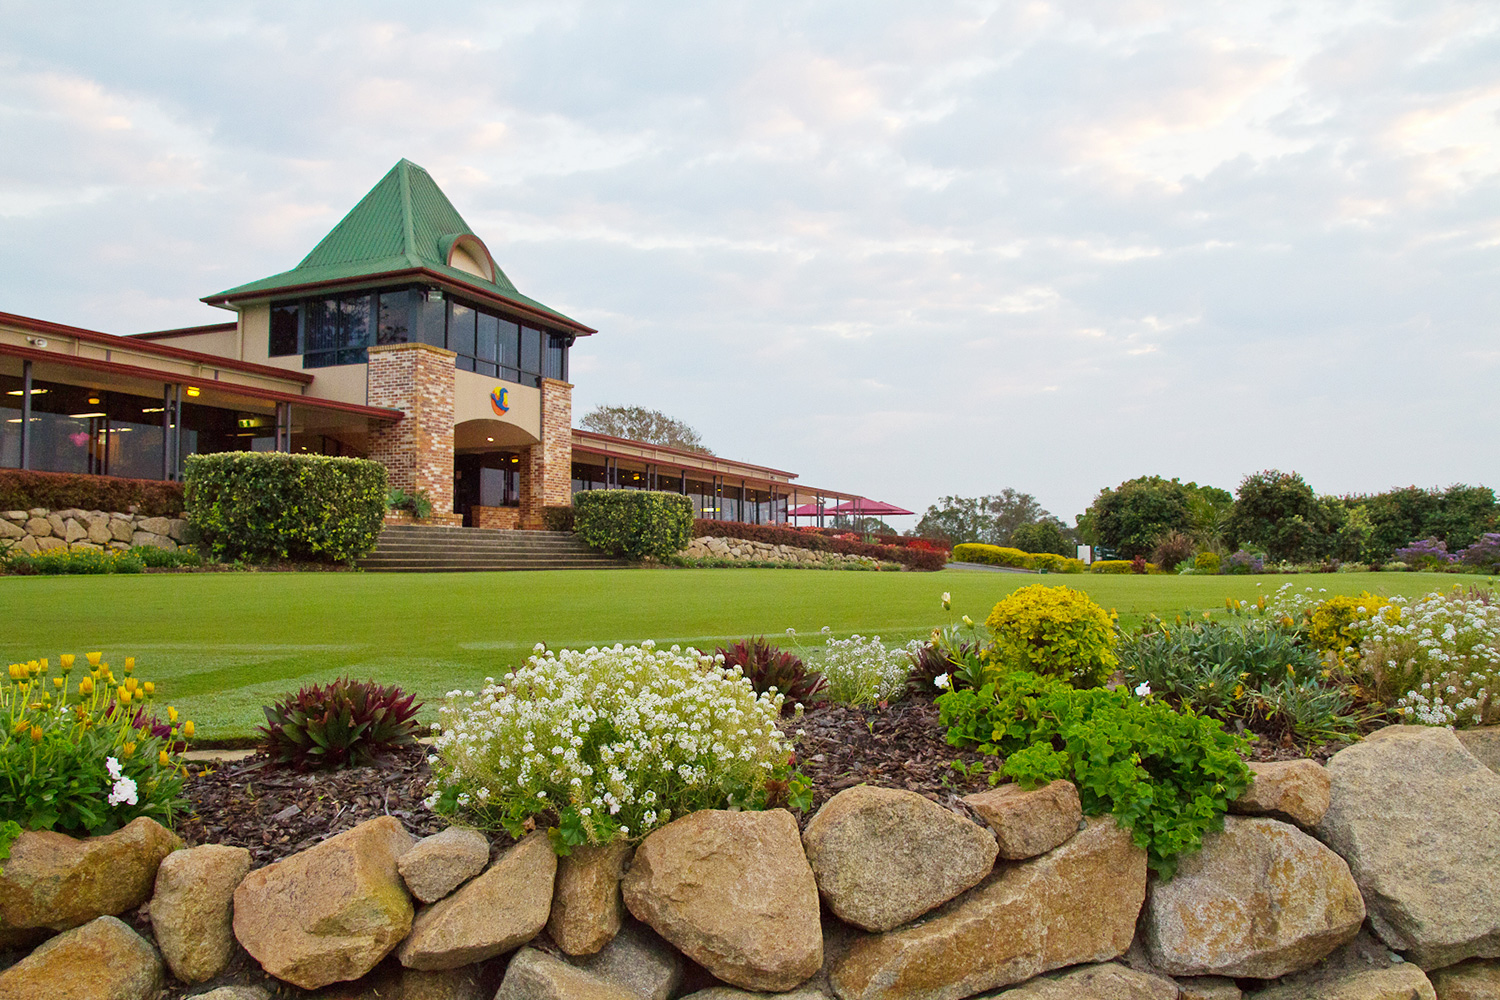 Nudgee Golf Club is in a great location for golfers living in or visiting Brisbane.